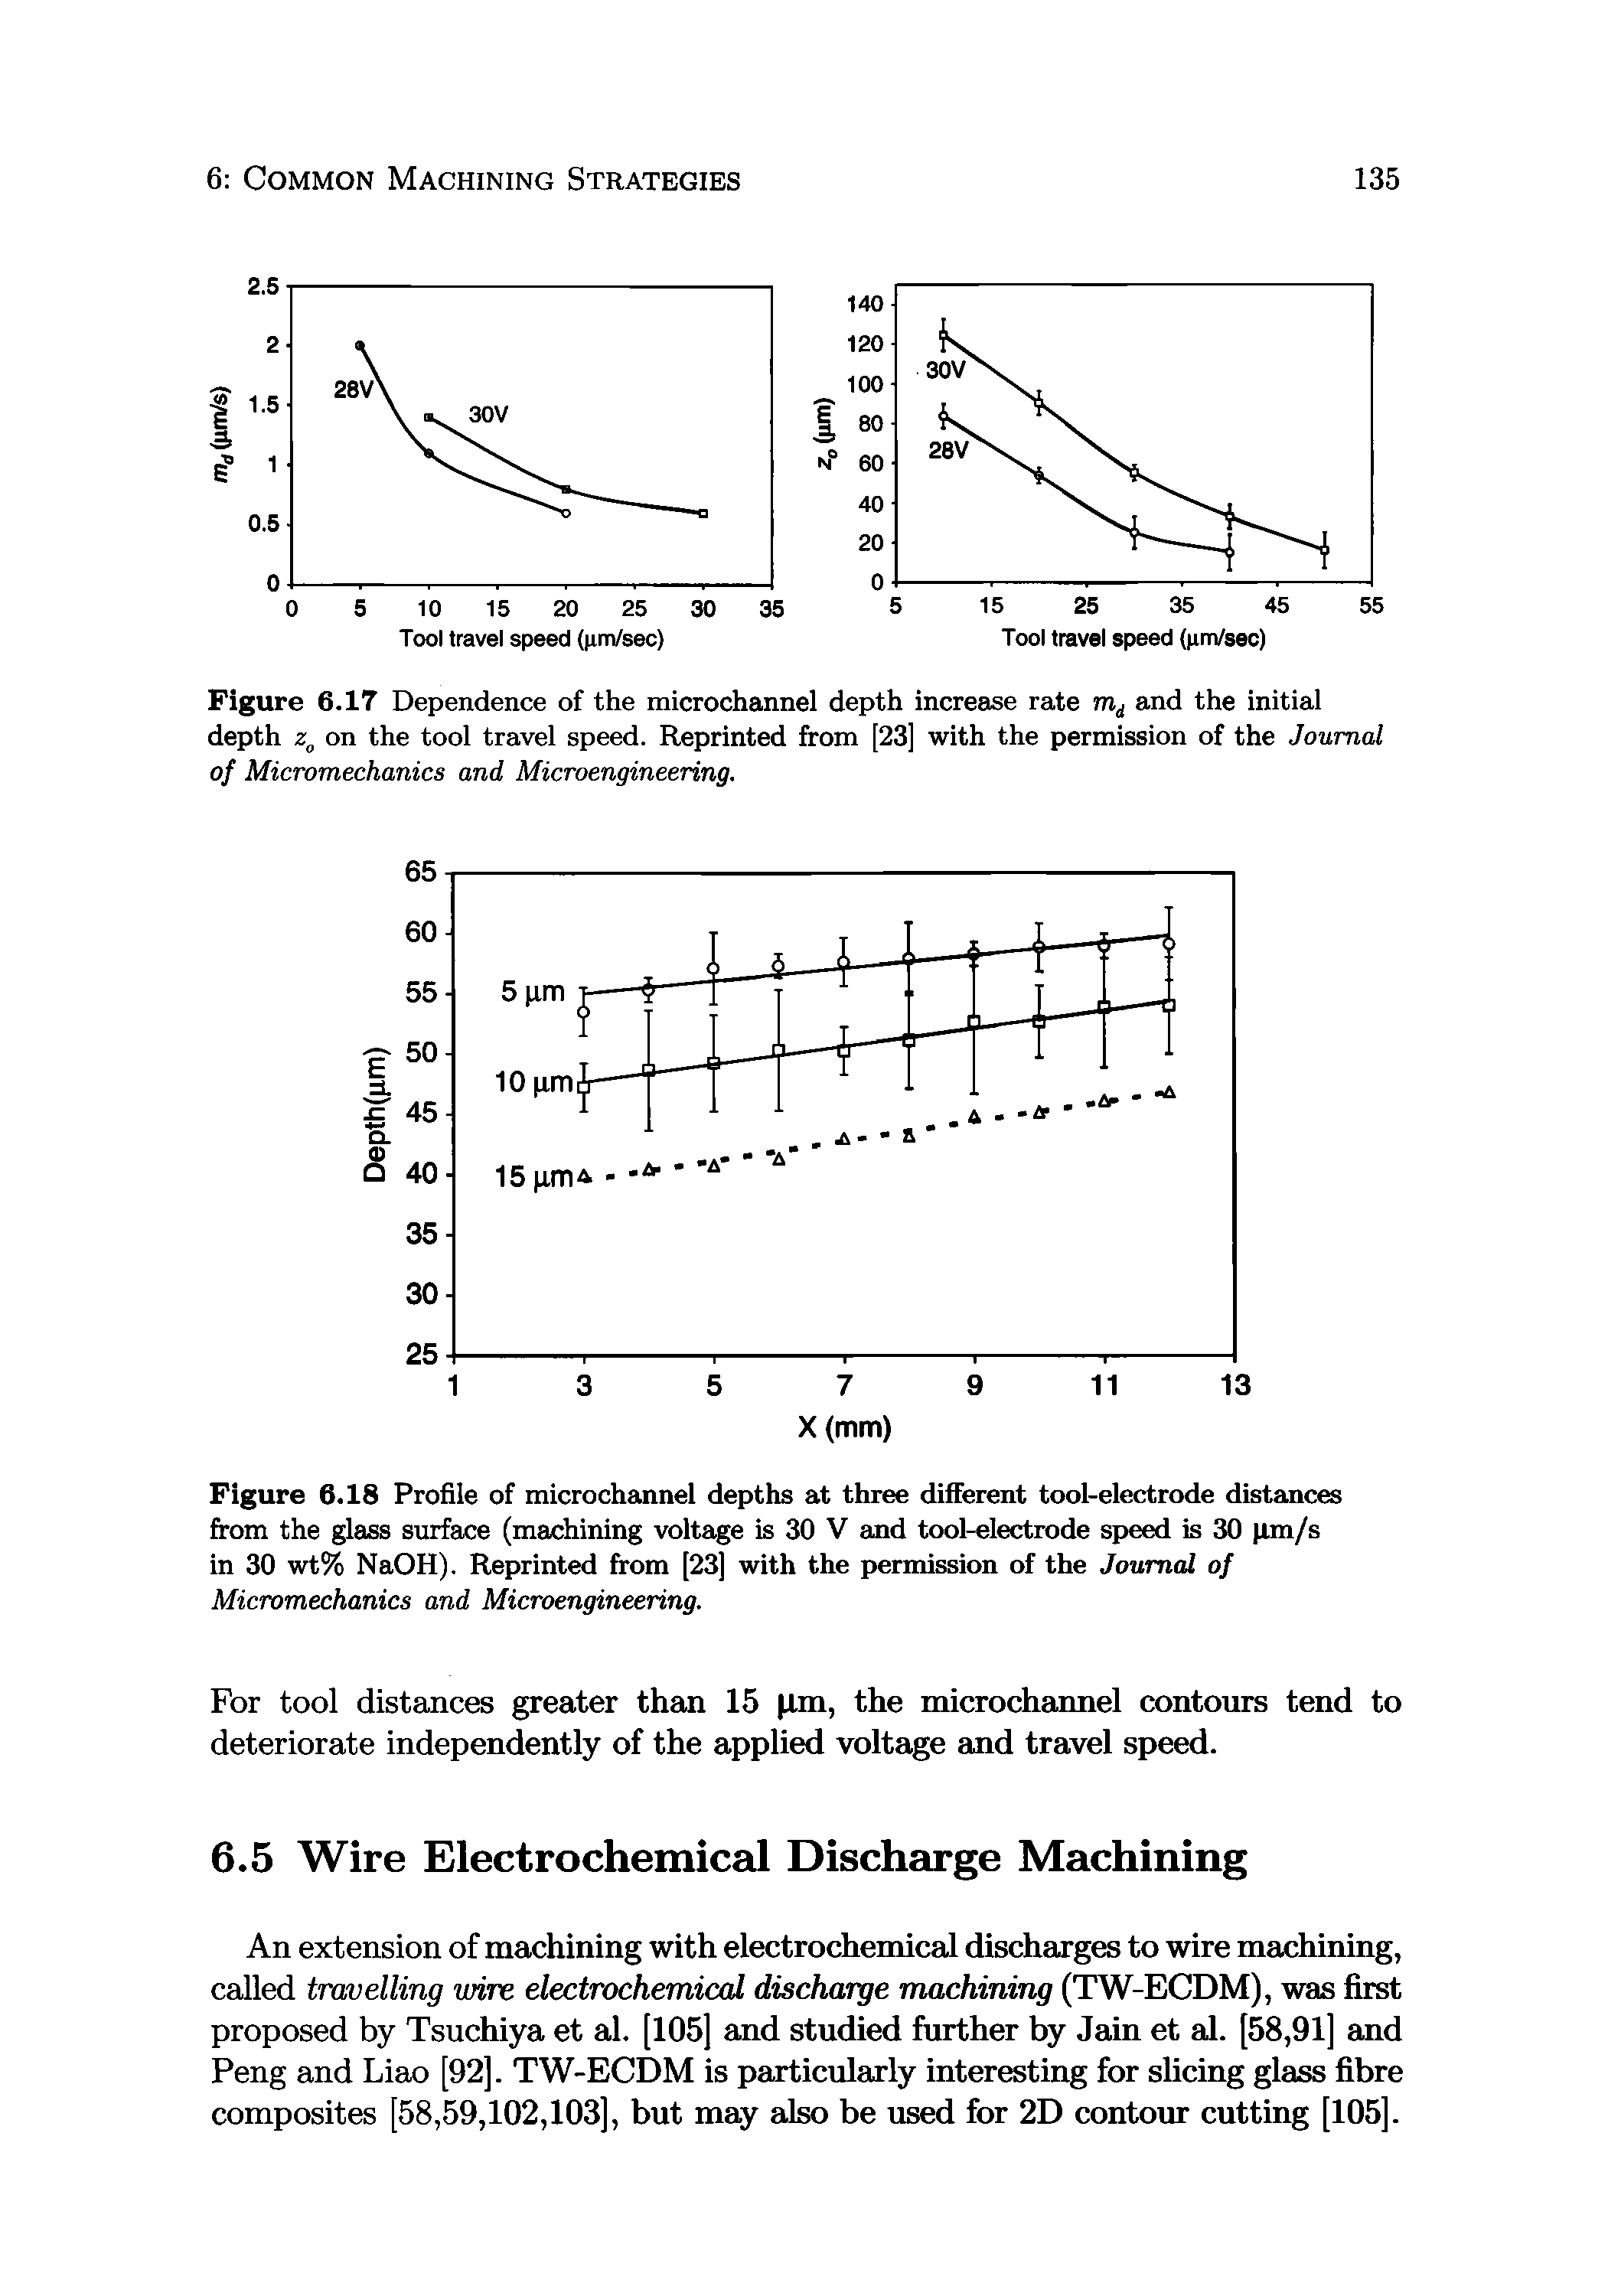 Figure 6.18 Profile of microchannel depths at three different tool-electrode distances from the glass surface (machining voltage is 30 V and tool-electrode speed is 30 pm/s in 30 wt% NaOH). Reprinted from [23] with the permission of the Journal of Micromechanics and Microengineering.